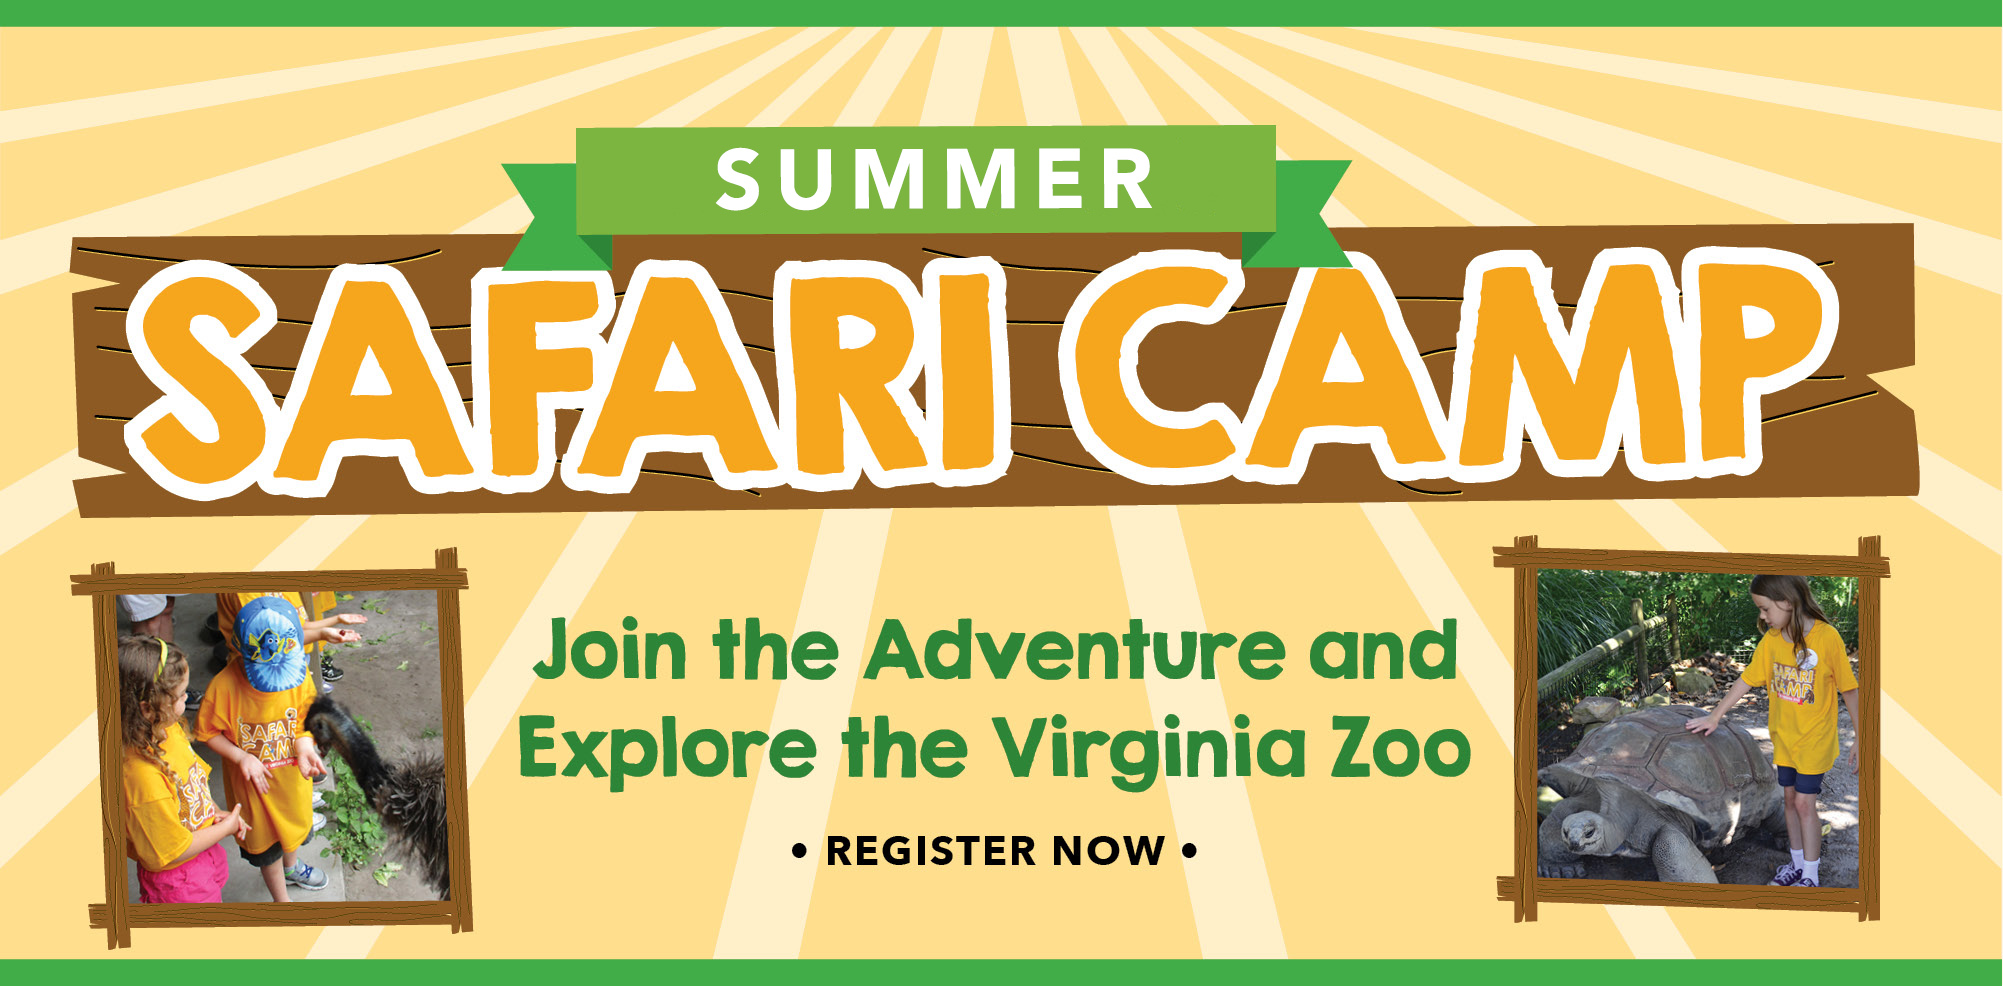 Things to Do in Norfolk: The Virginia Zoo